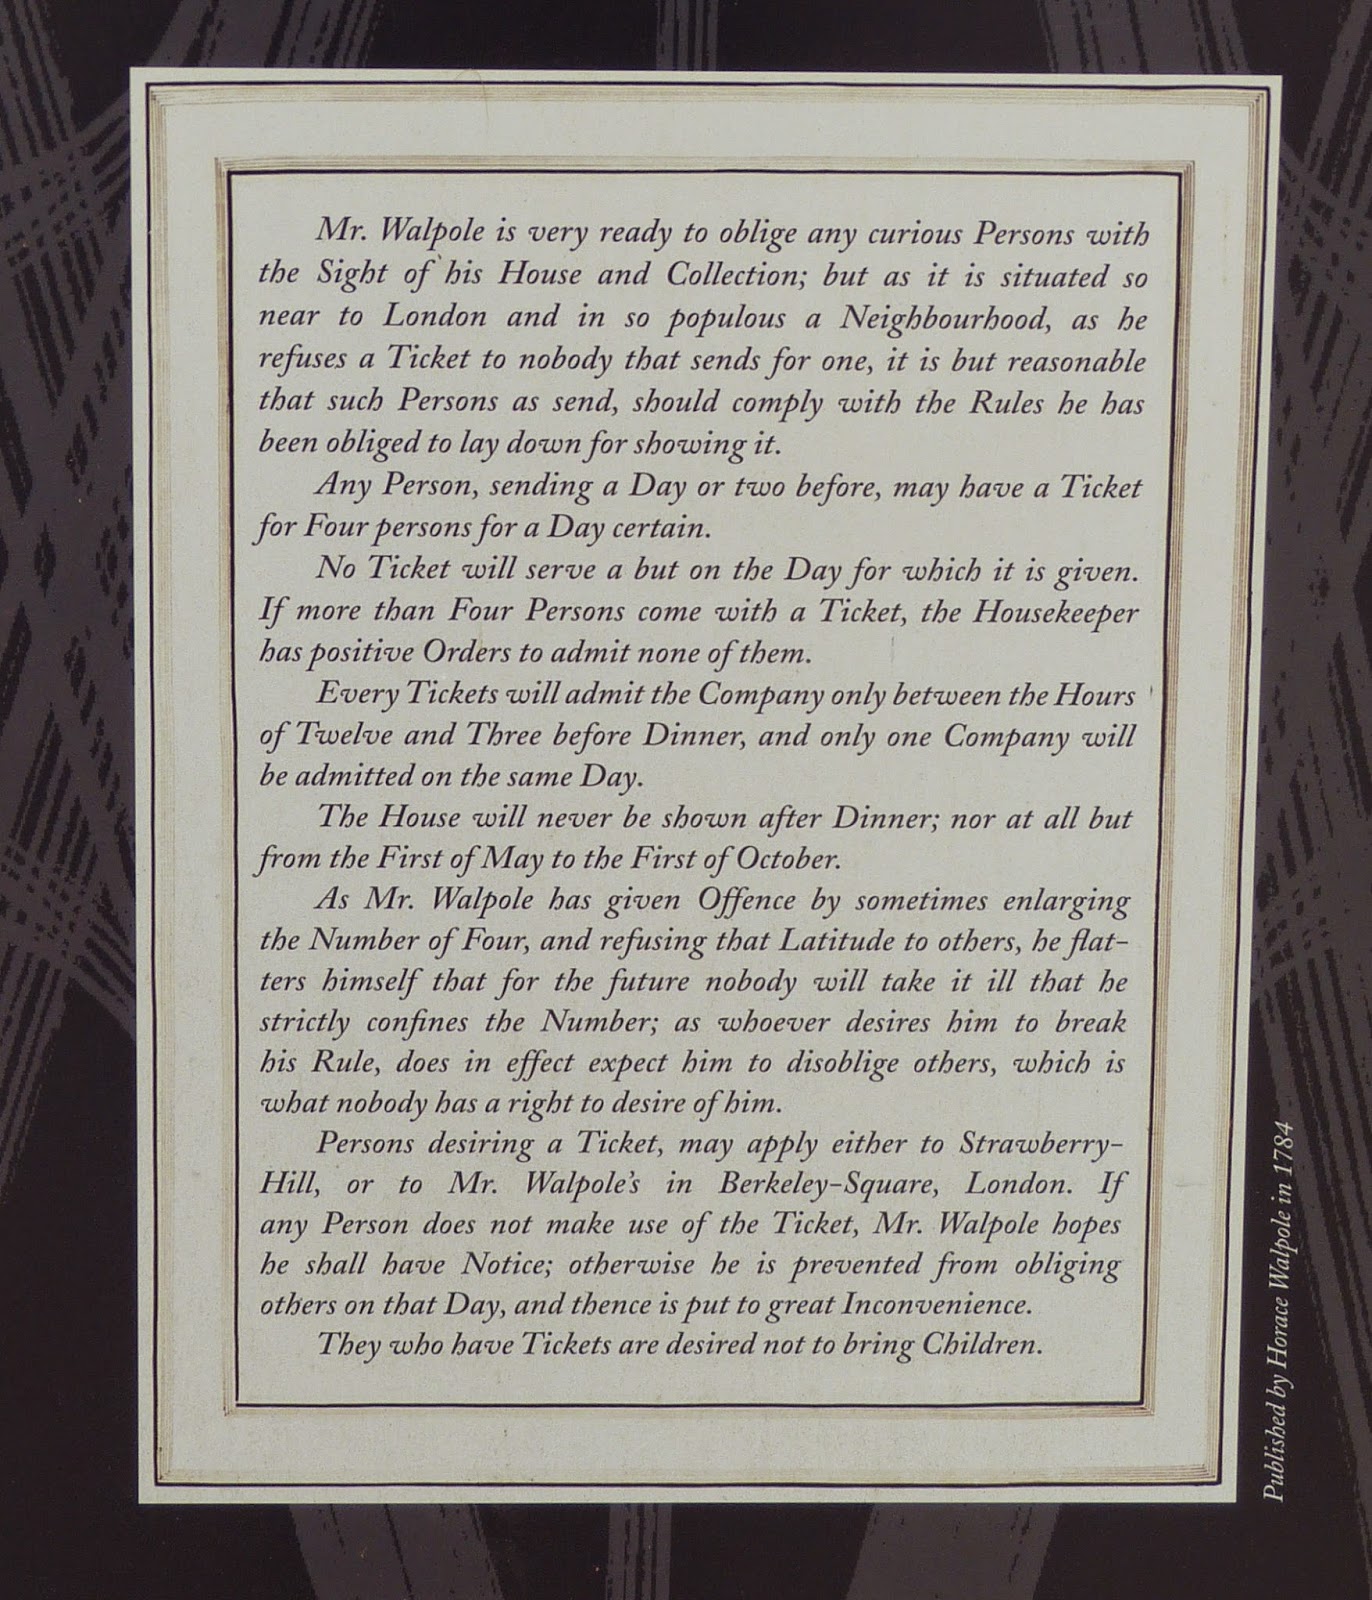 Horace Walpole's rules for viewing Strawberry Hill